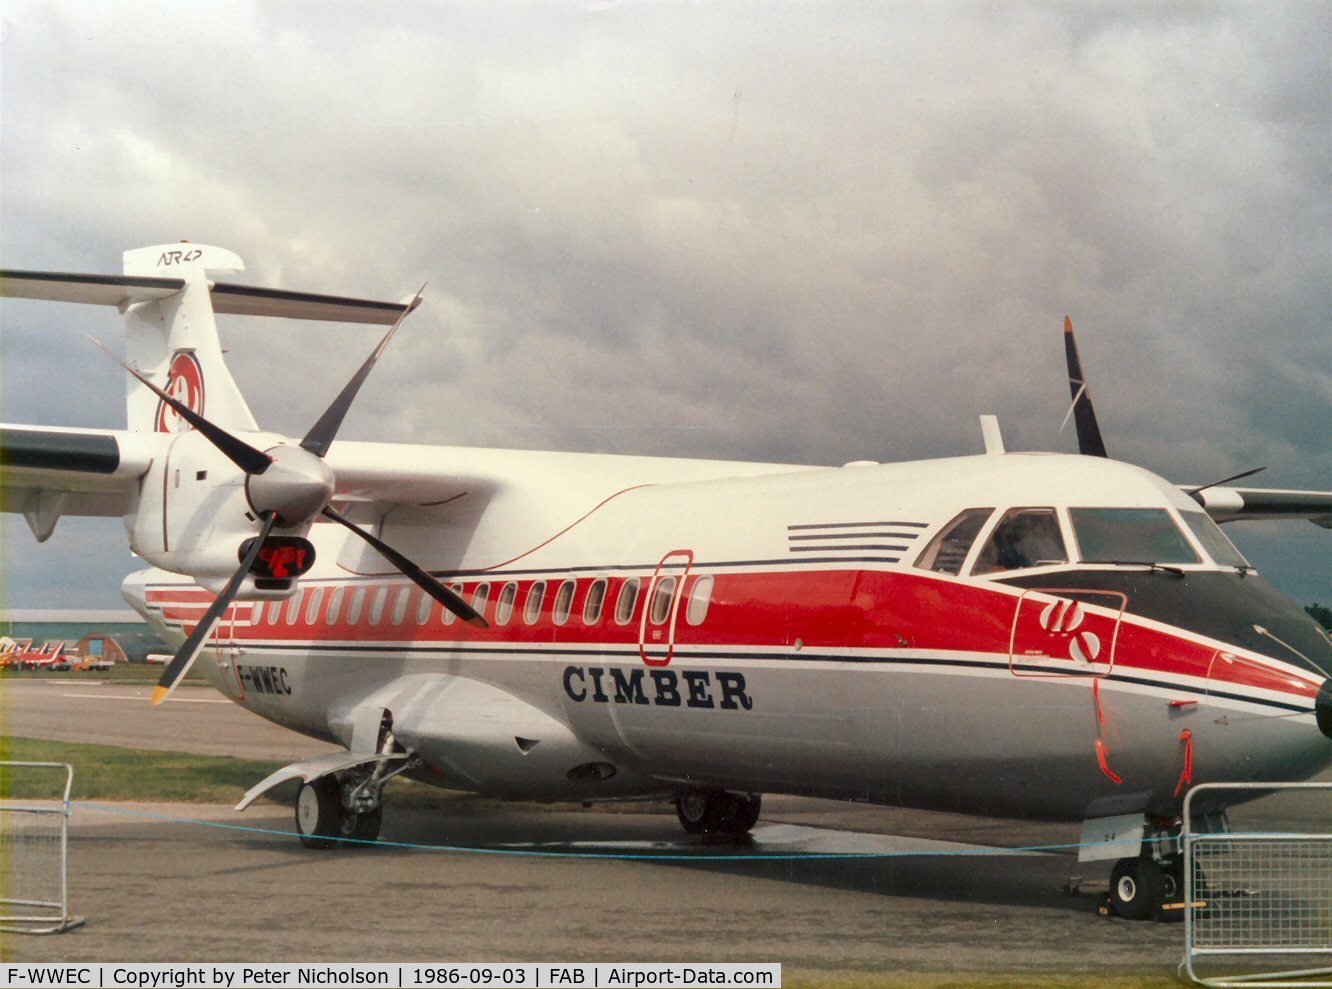 F-WWEC, 1986 ATR 42-312 C/N 024, With a test registration and destined for Cimber Air of Denmark, this ATR-42 was demonstrated at the 1986 Farnborough Airshow.